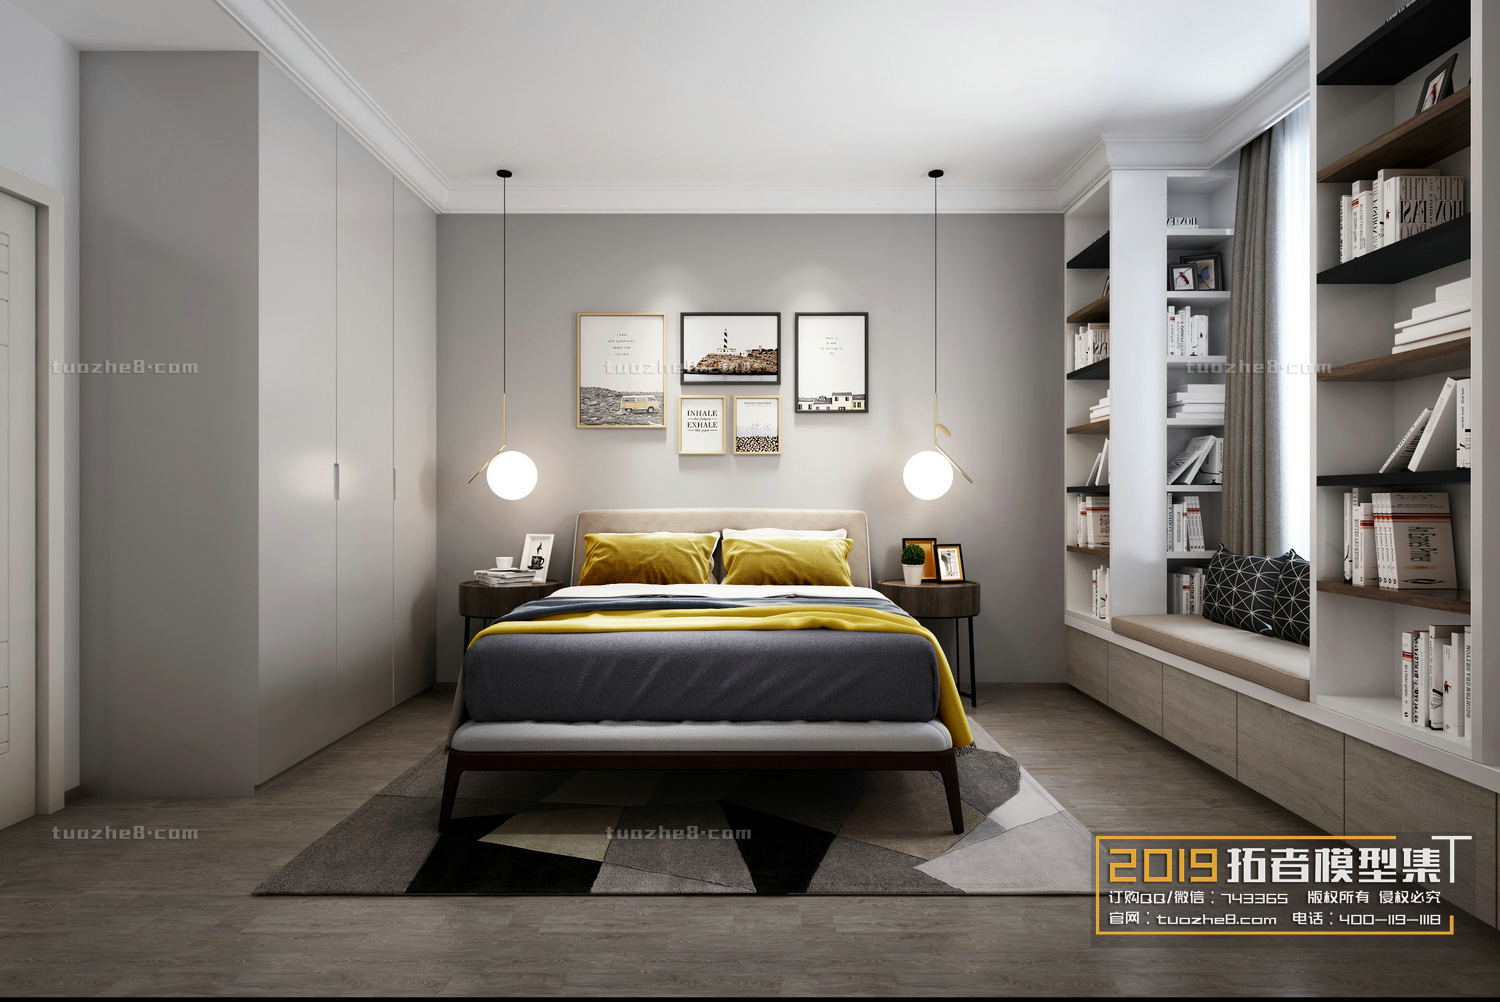 Extension Interior – BEDROOM – NORDIC STYLES – 017 - thumbnail 1